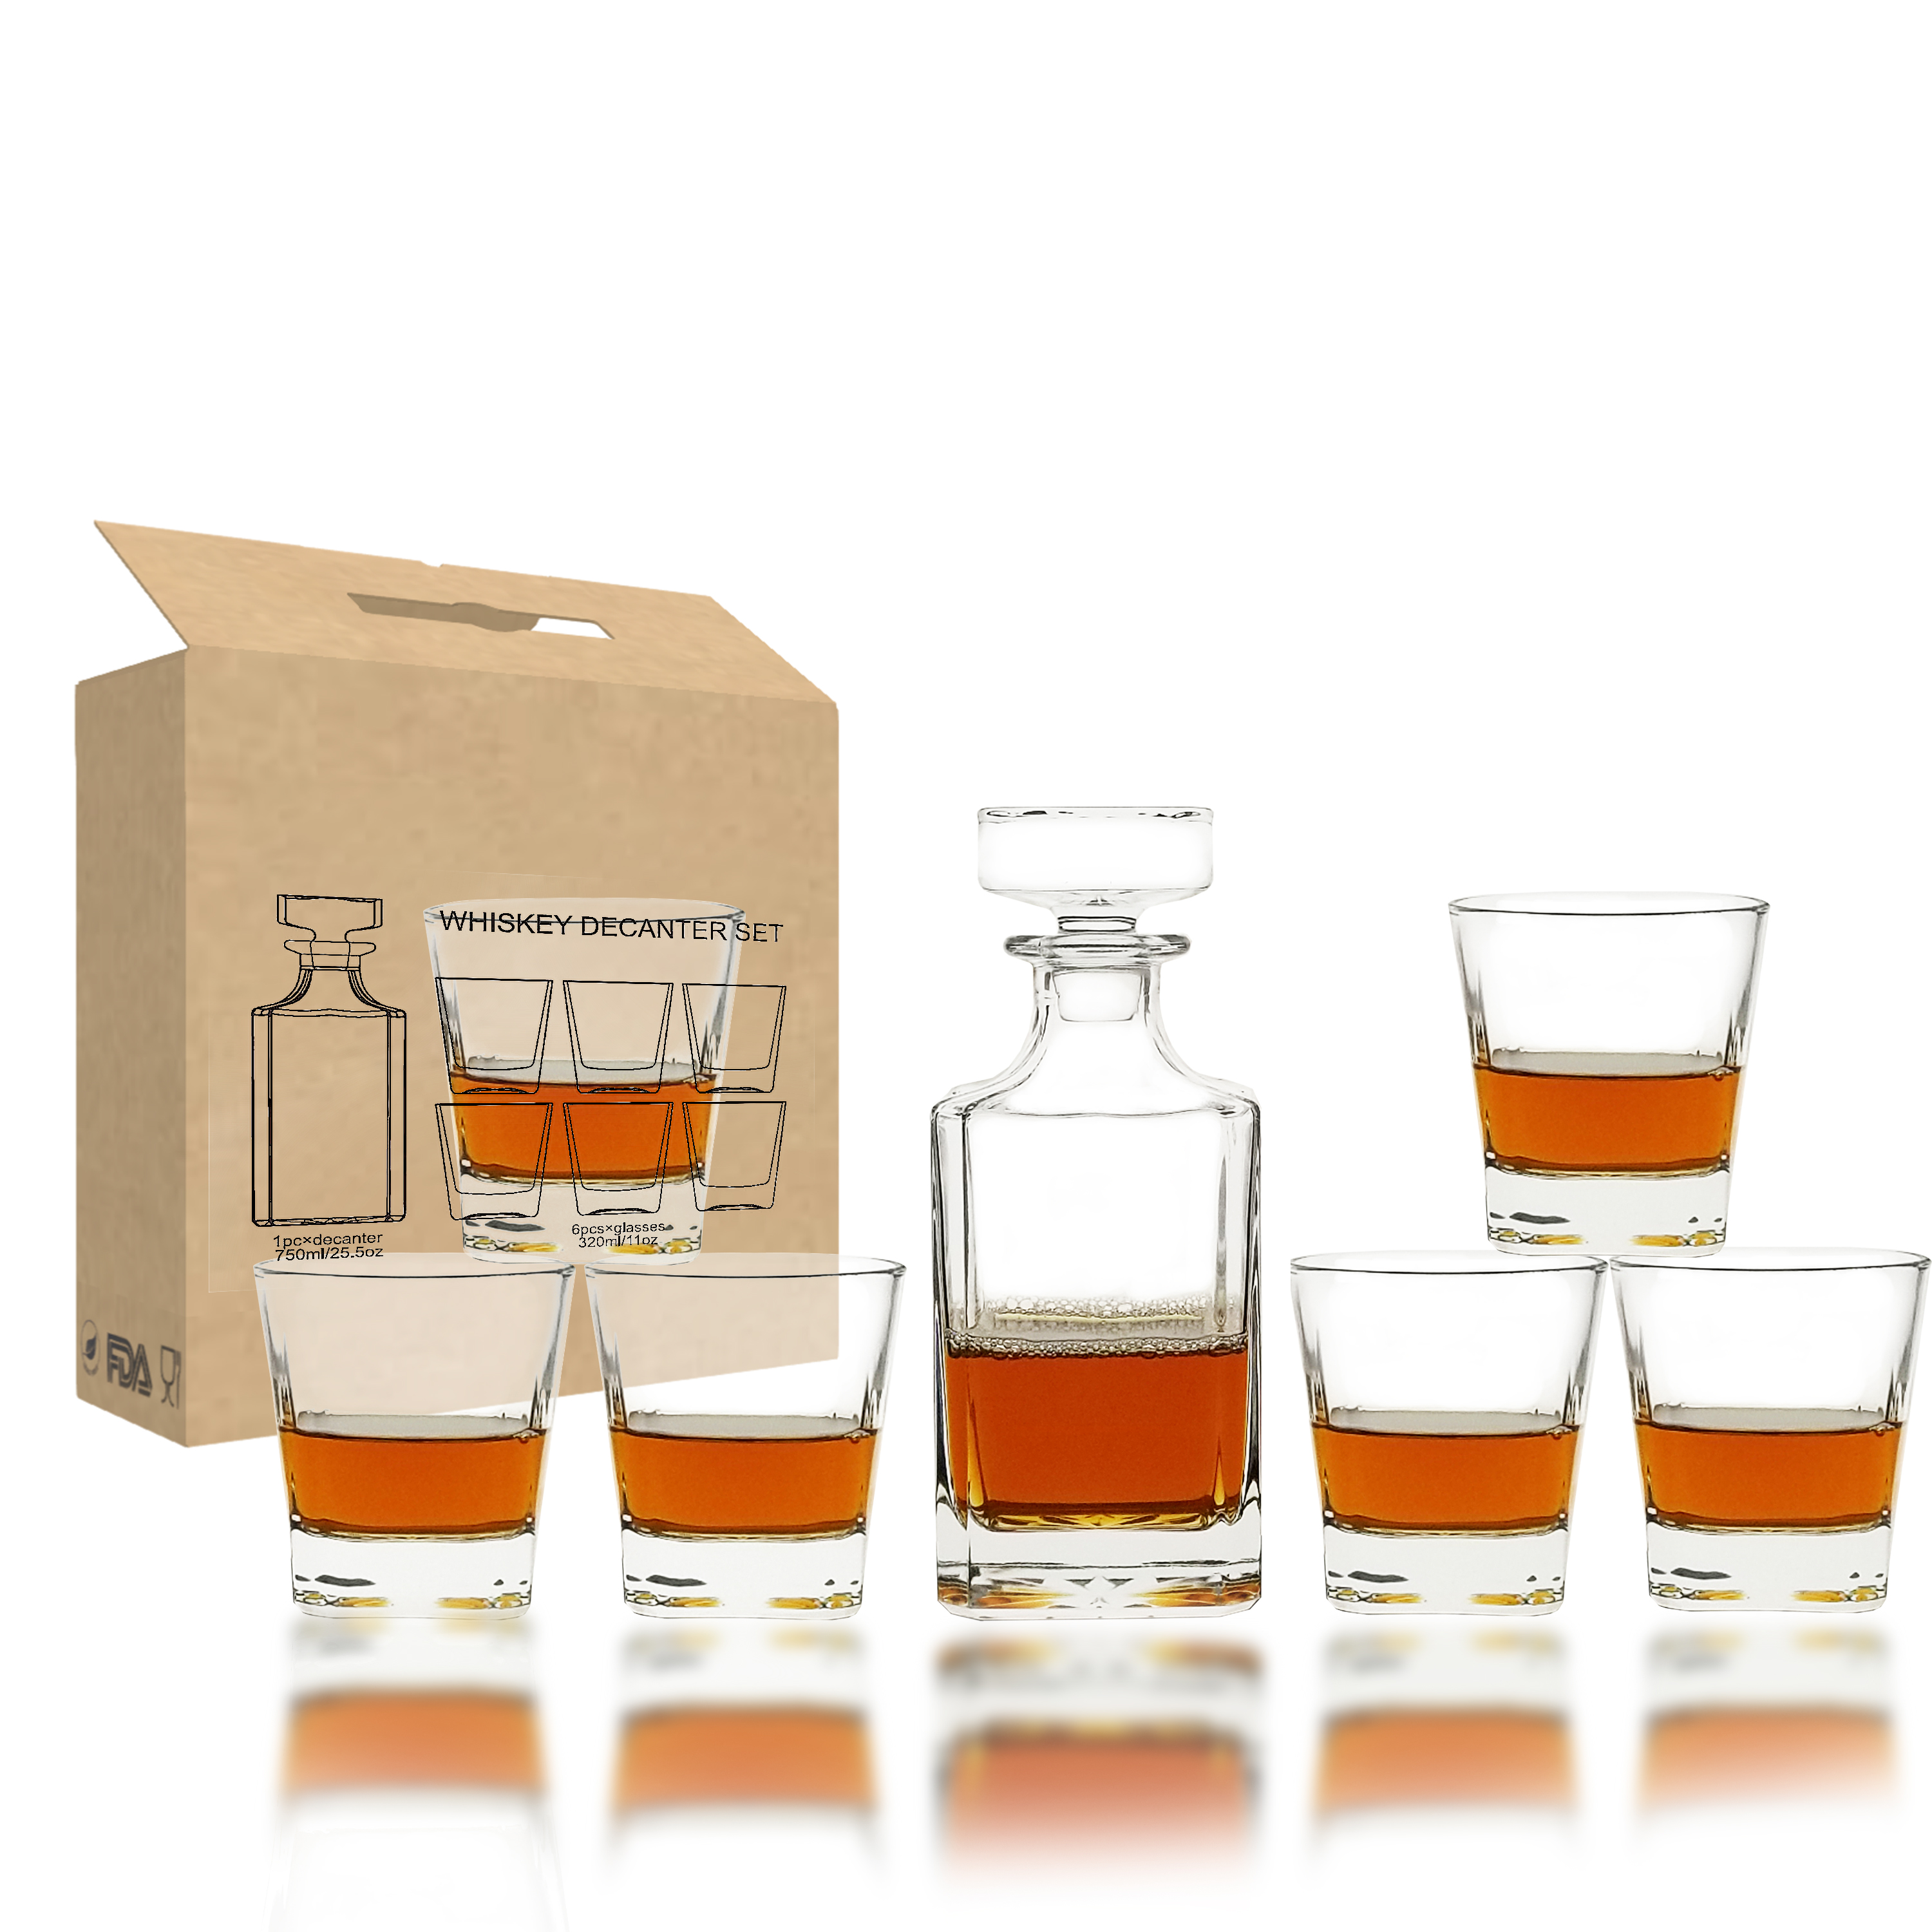 Admirable Whisky Decanter Set